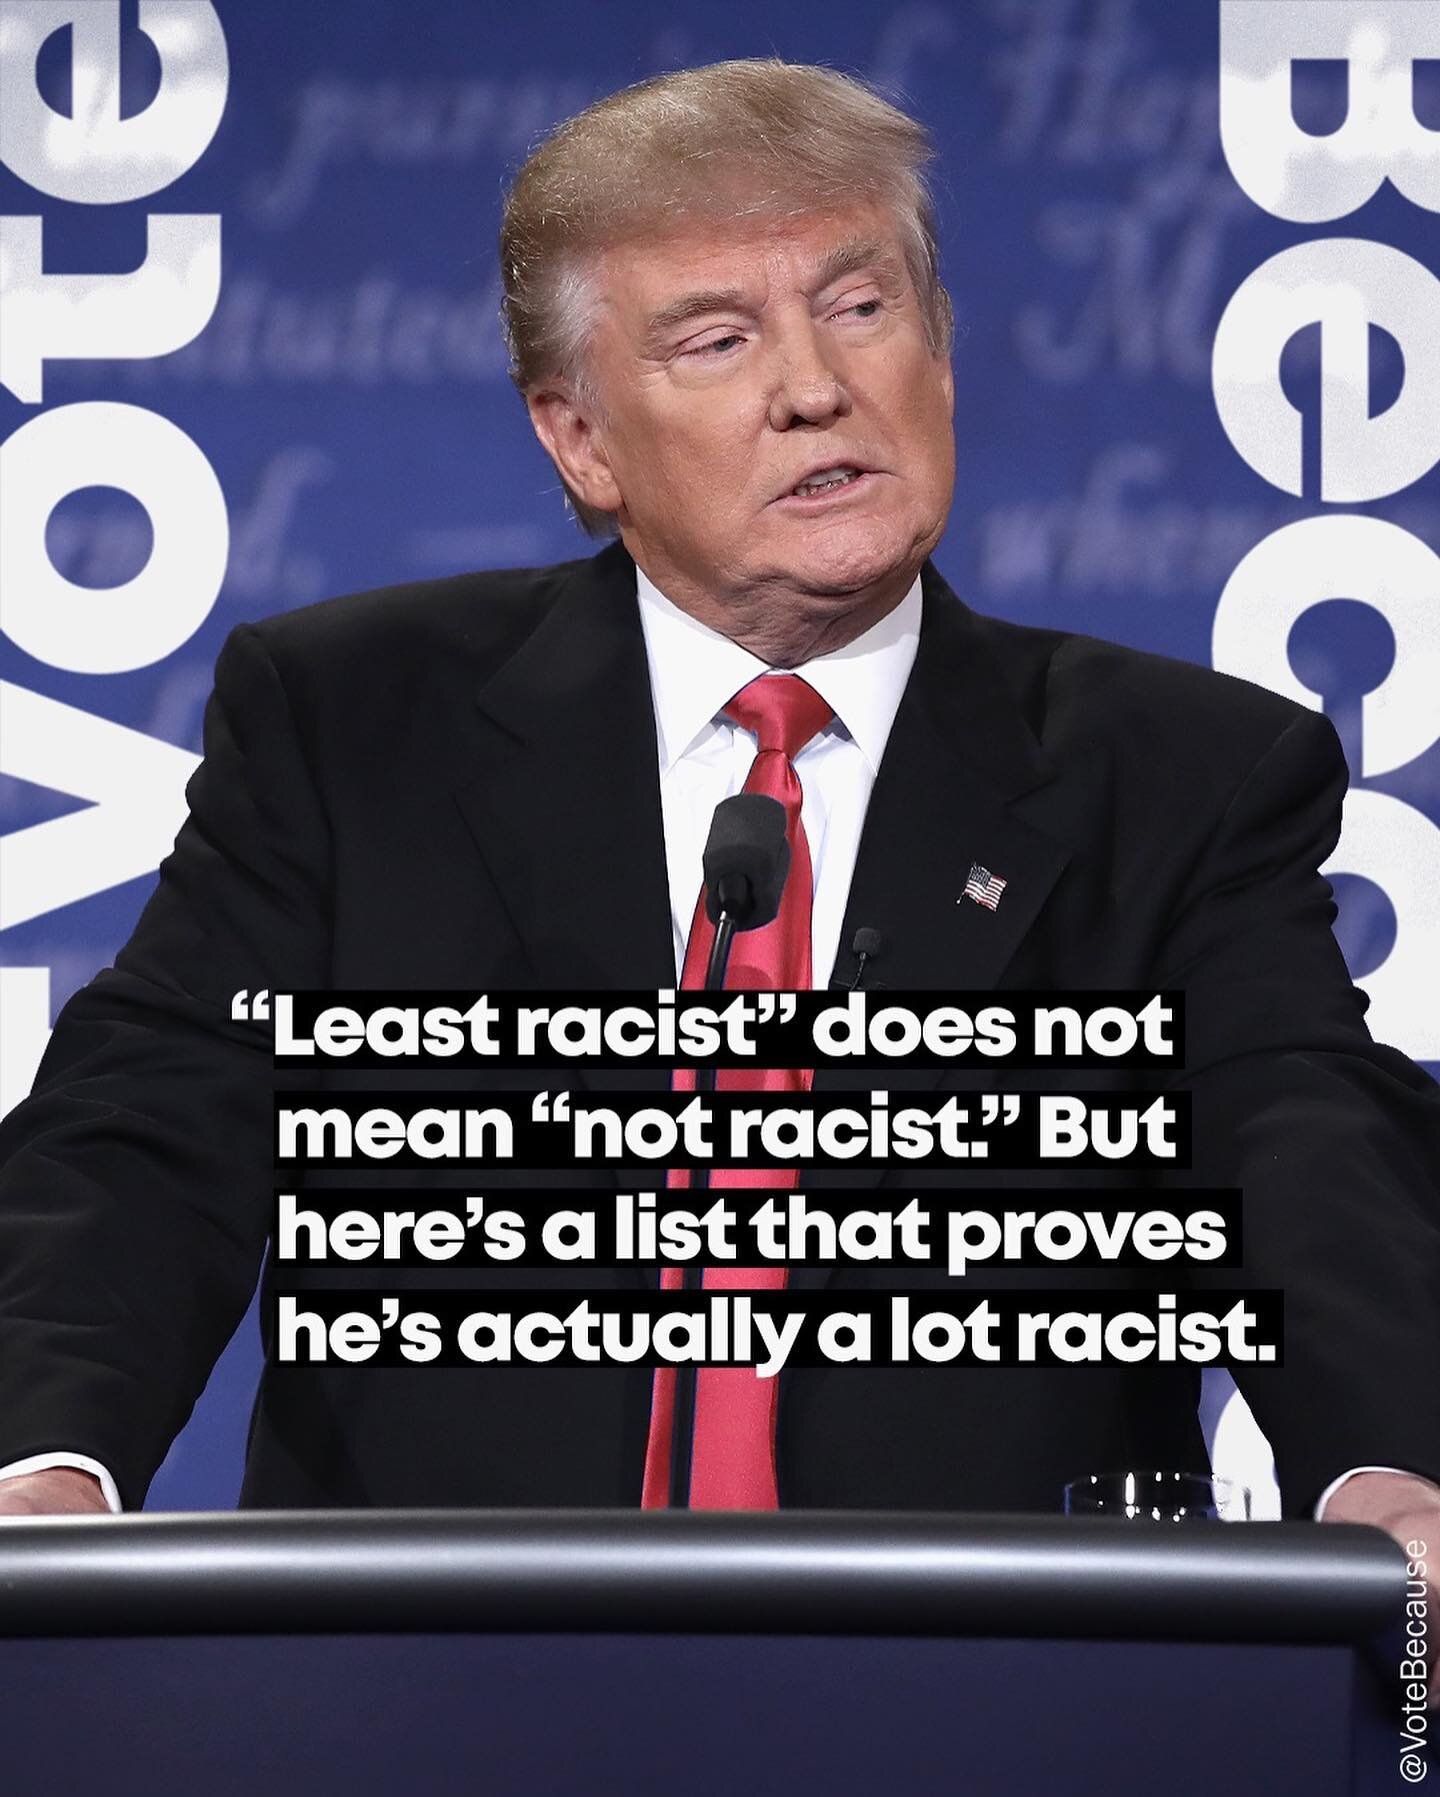 Here are some highlights of our president&rsquo;s long history of racism, from the 1970s to 2020, extracted from an exhaustive article by @voxdotcom 
#VoteBecause #VoteHimOut #BidenHarris2020